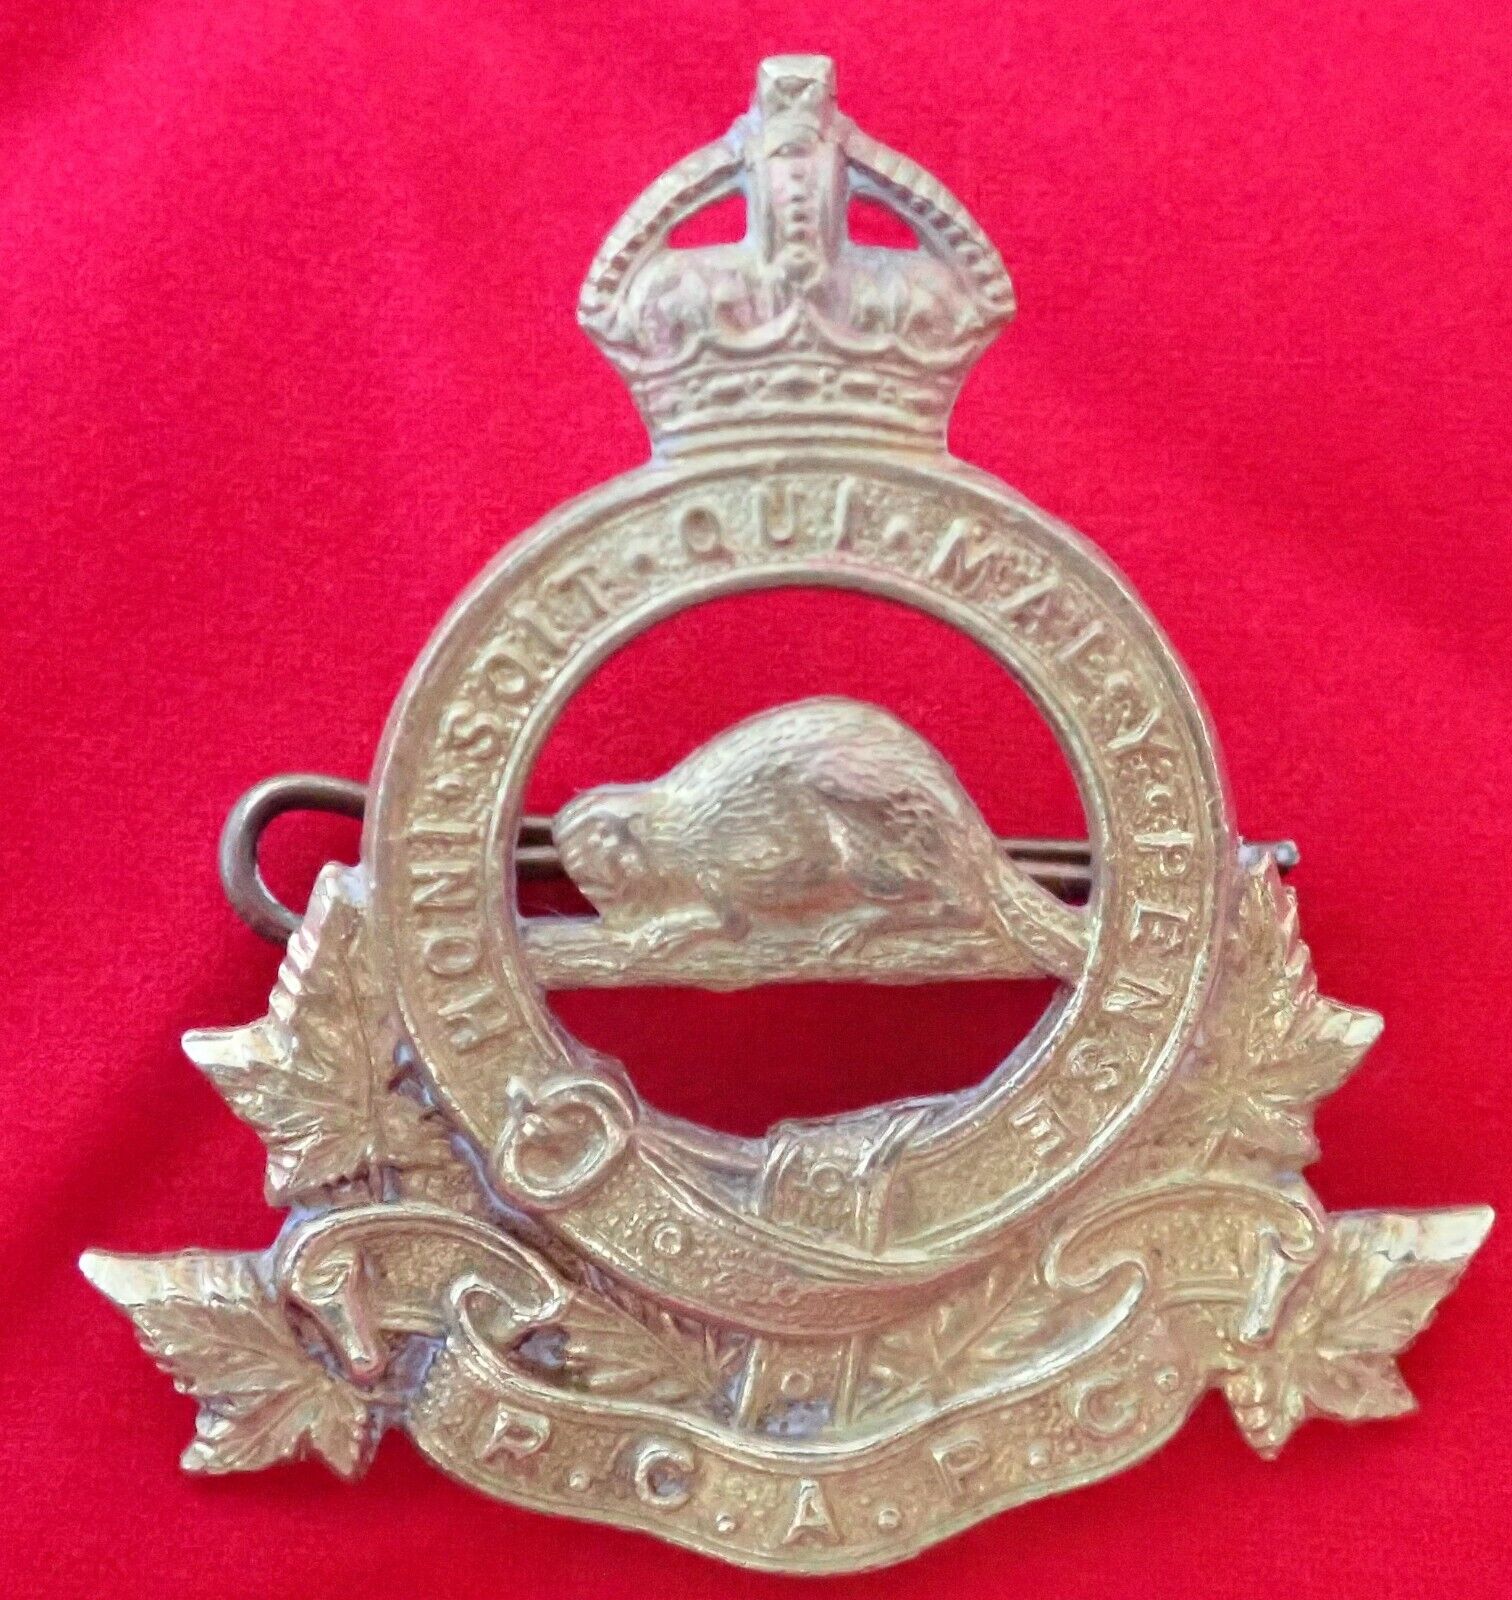 ROYAL CANADIAN ARMY CAP BADGE~ROYAL CANADIAN ARMY PAY CORPS~R.C.A.P.C.~WW II